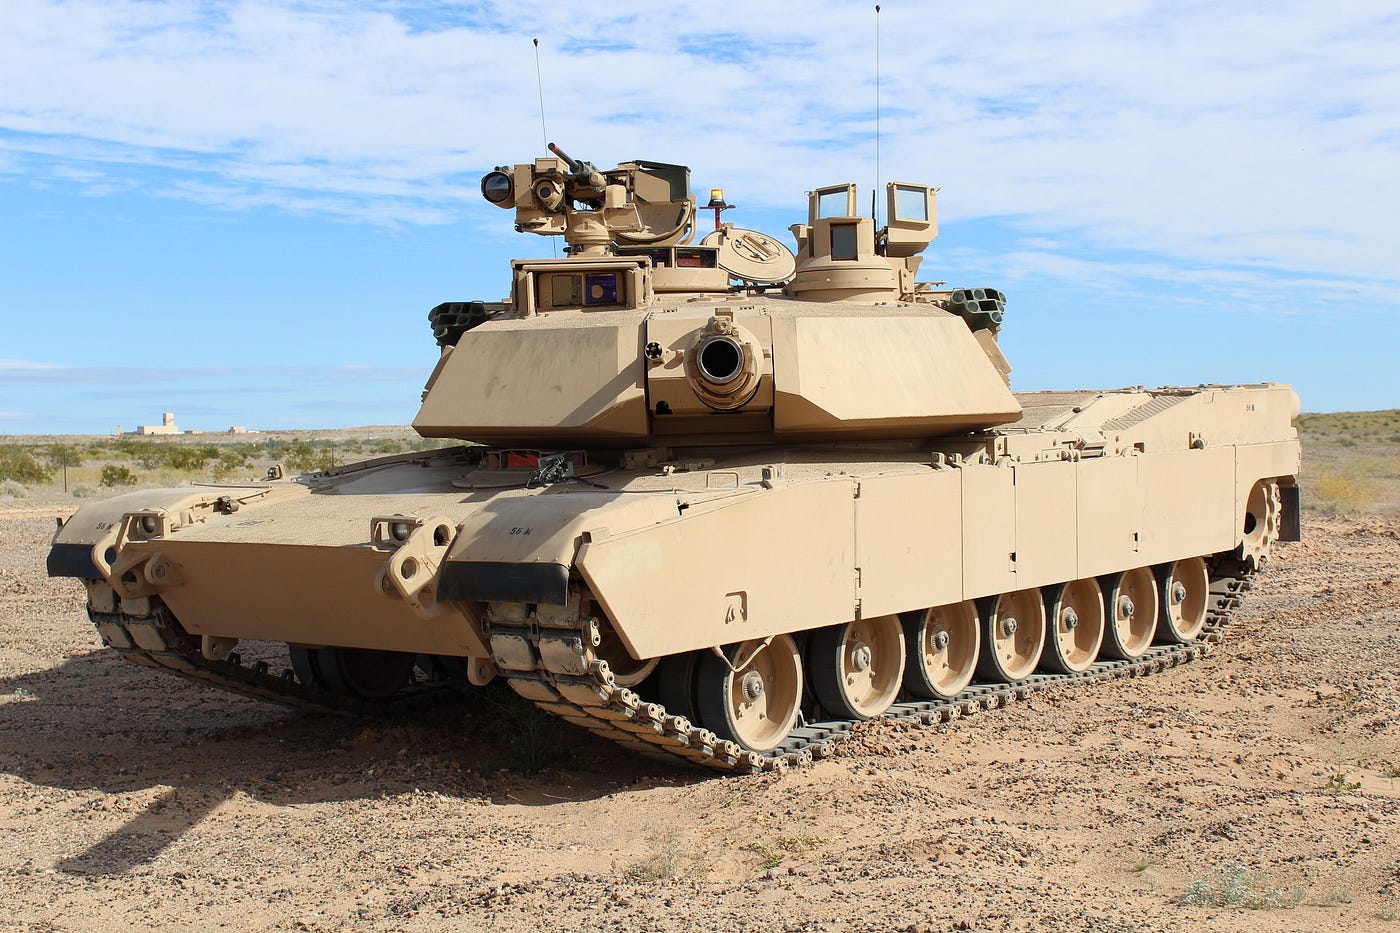 Abrams Tanks: Five Fast Facts. The heavy main American tank was… | by Mark  Mahon | Medium